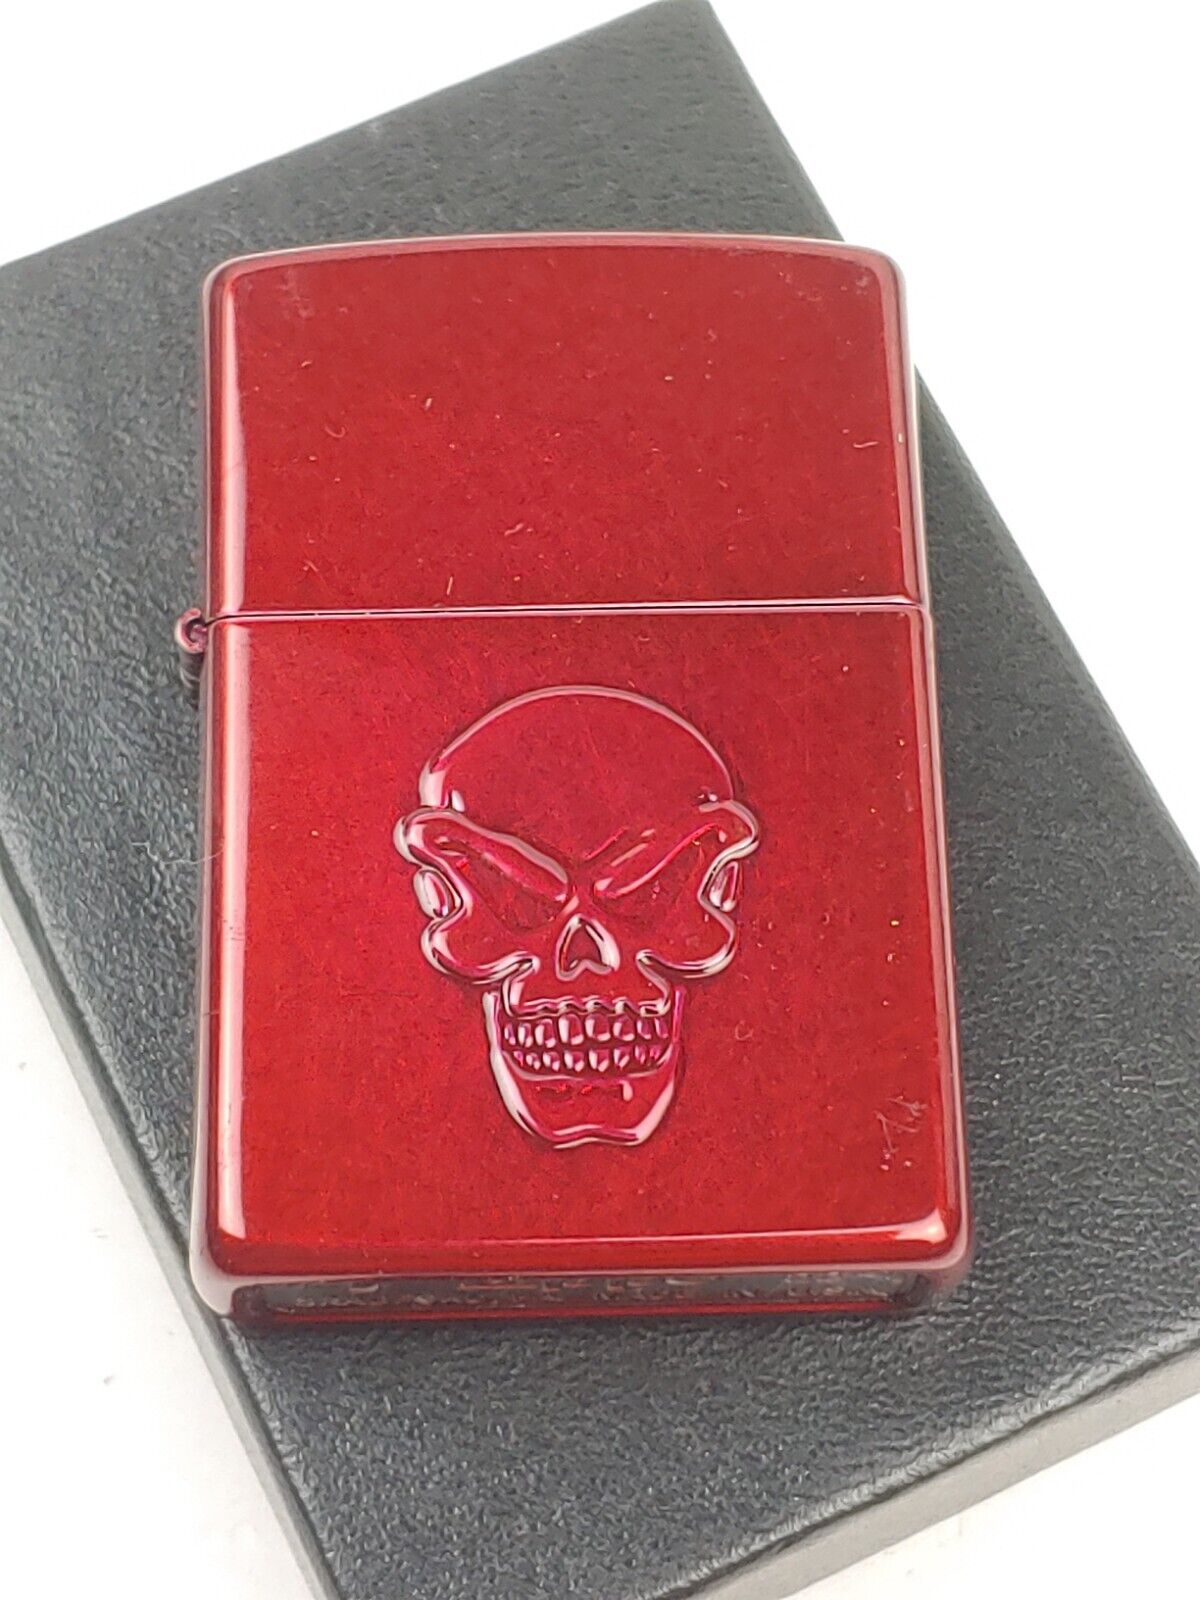 Zippo 21063 Candy Apple Red Windproof Lighter w/ Embossed Skull  - APR (D) 2022